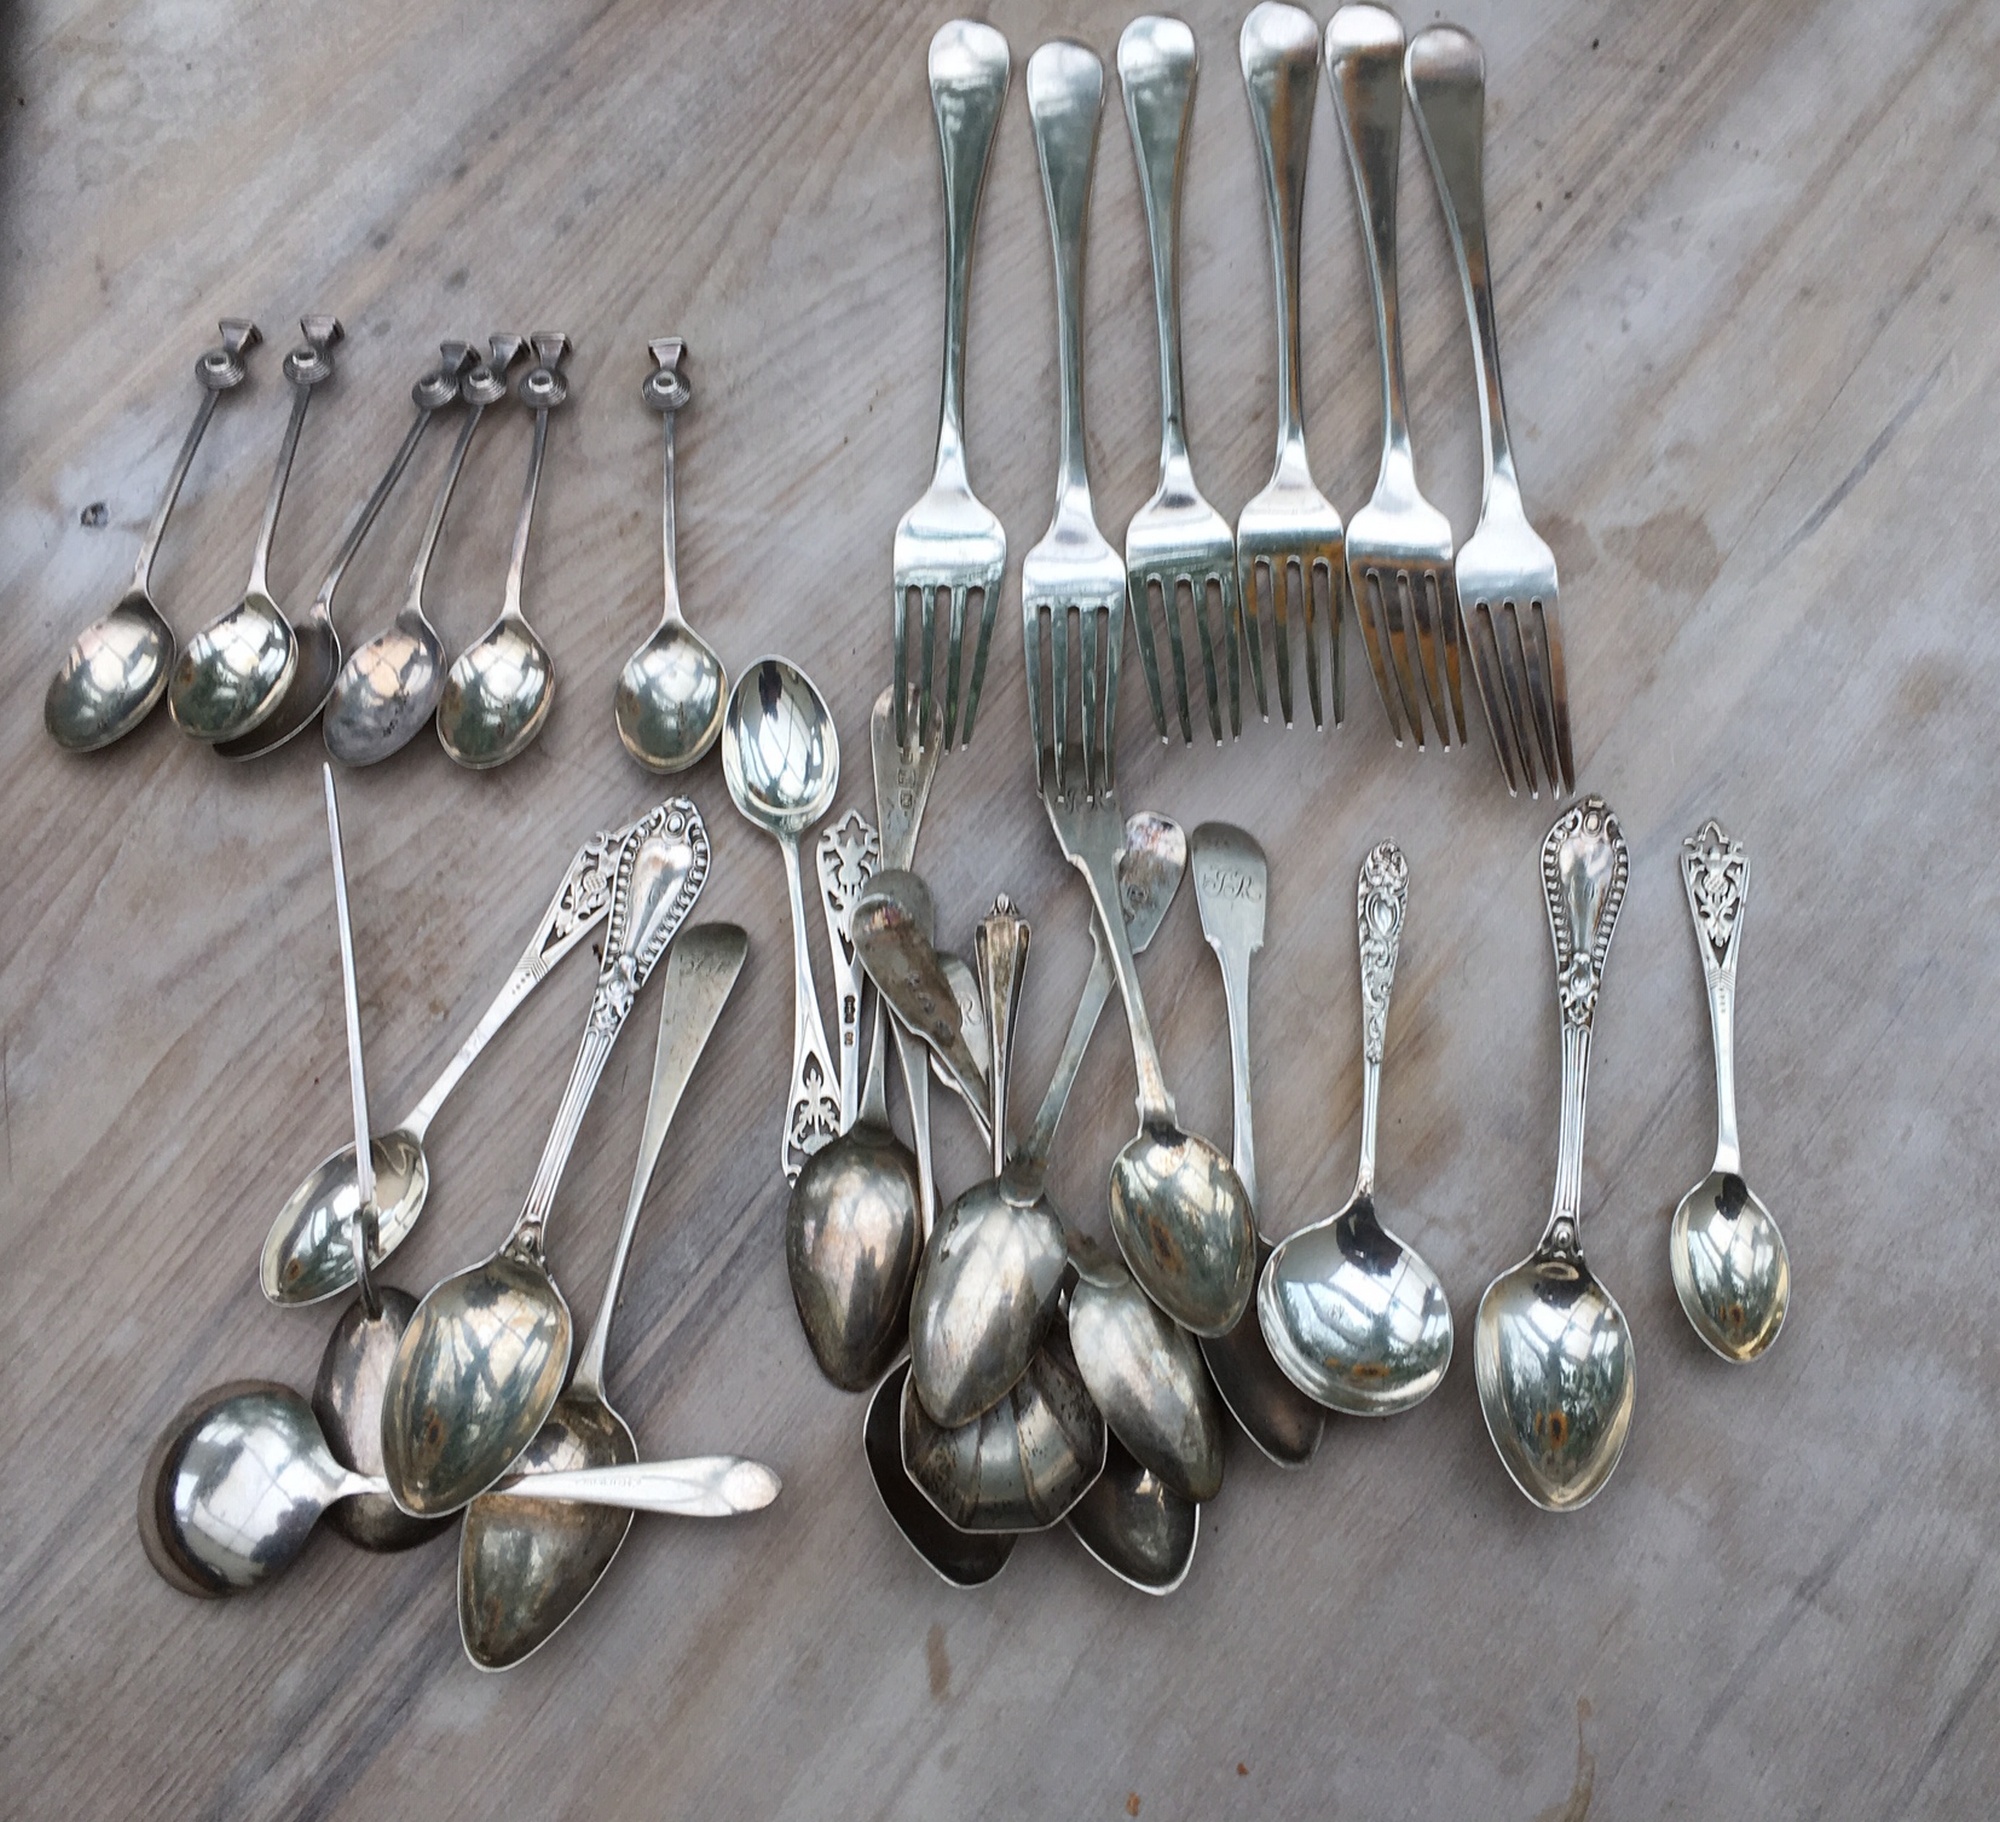 Lot of some 600 grams of Antique/Vintage Silver Spoons and White Metal Forks? - Image 12 of 16